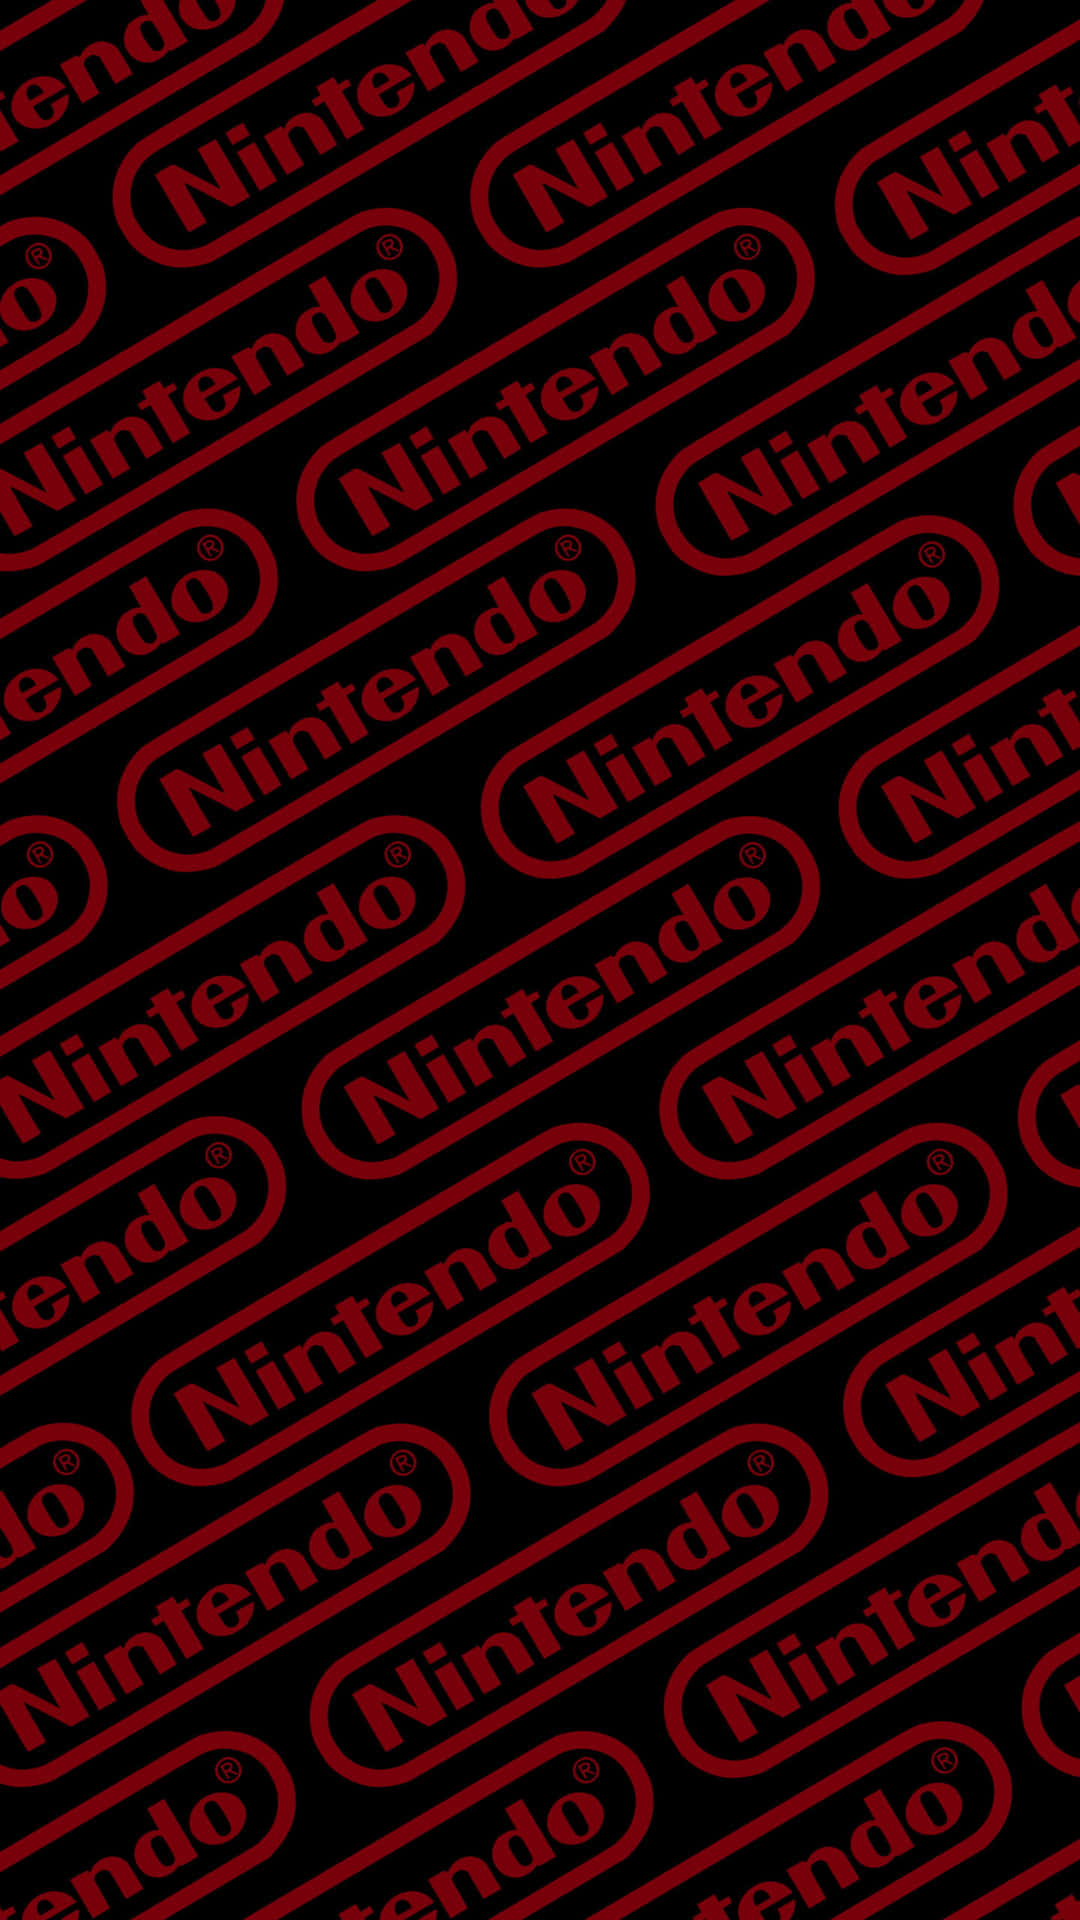 A Red And Black Nintendo Logo On A Black Background Wallpaper